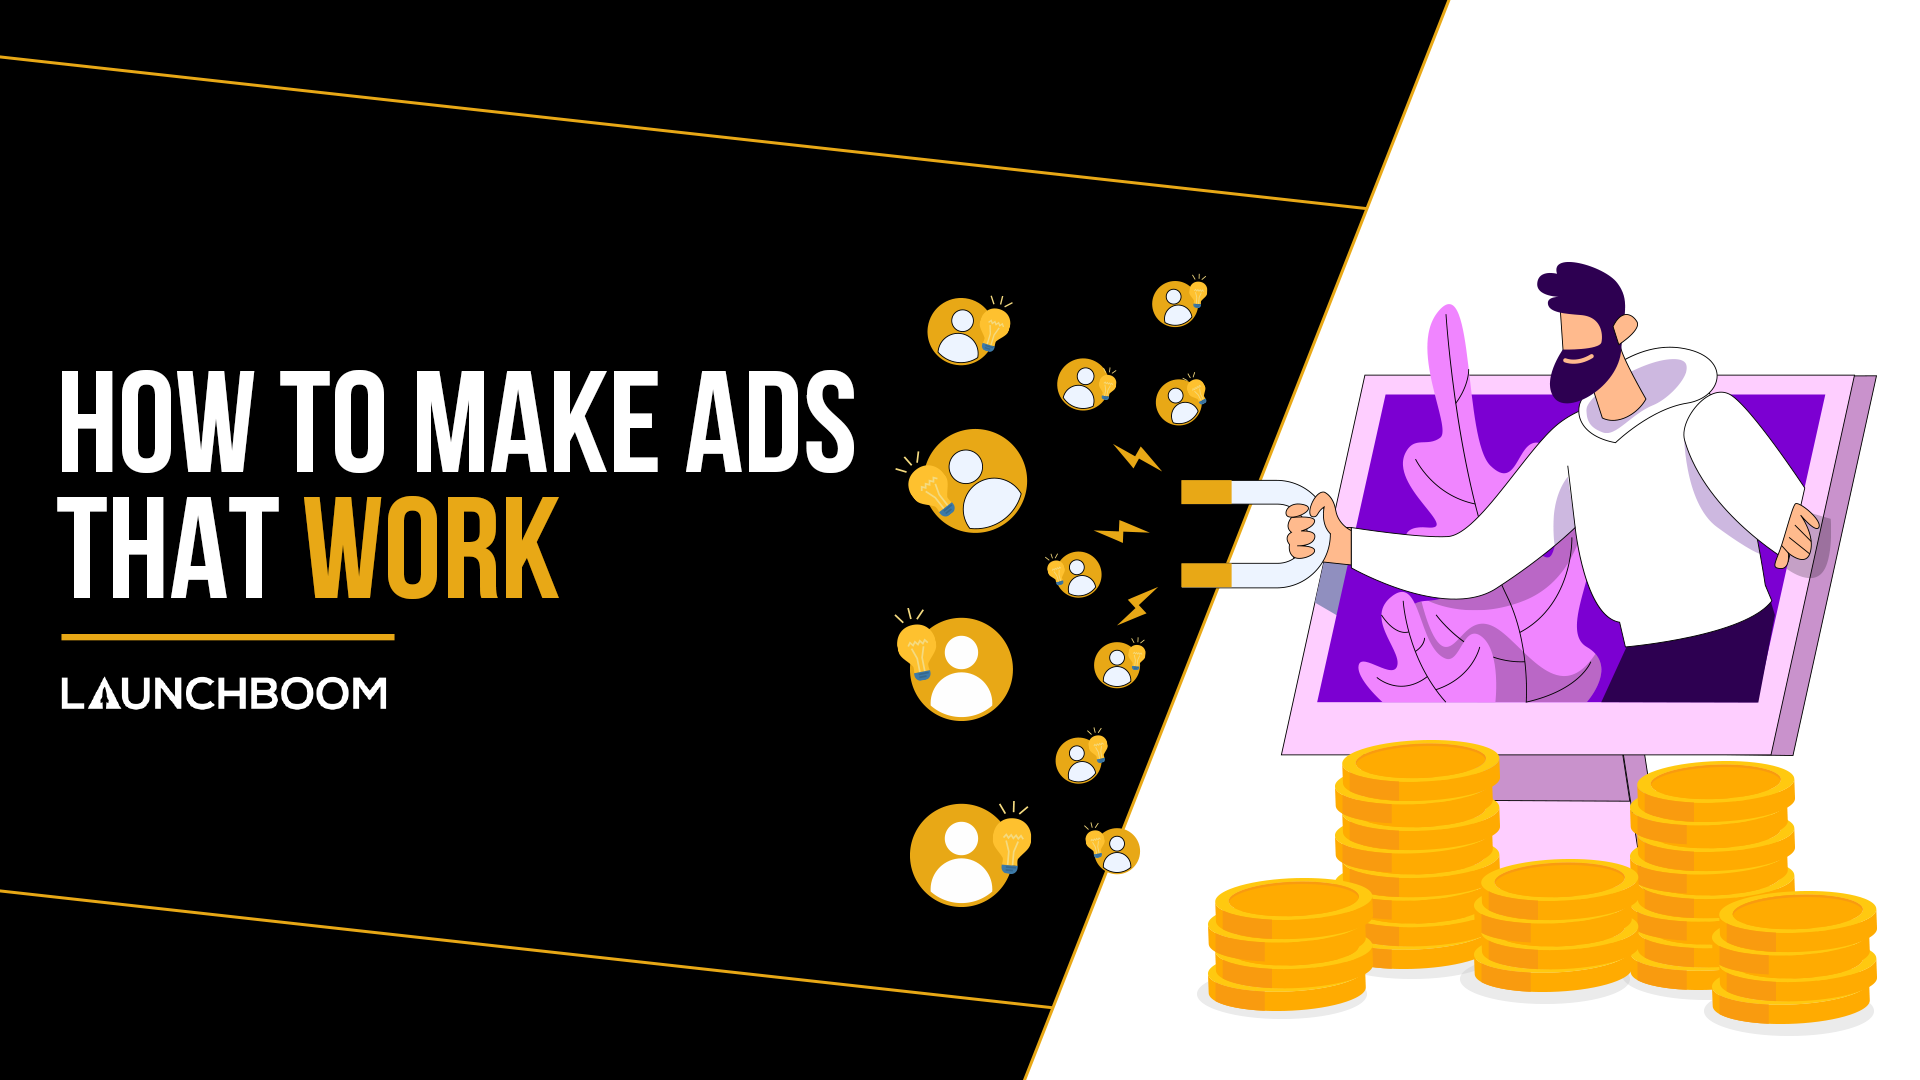 How to make ads that work